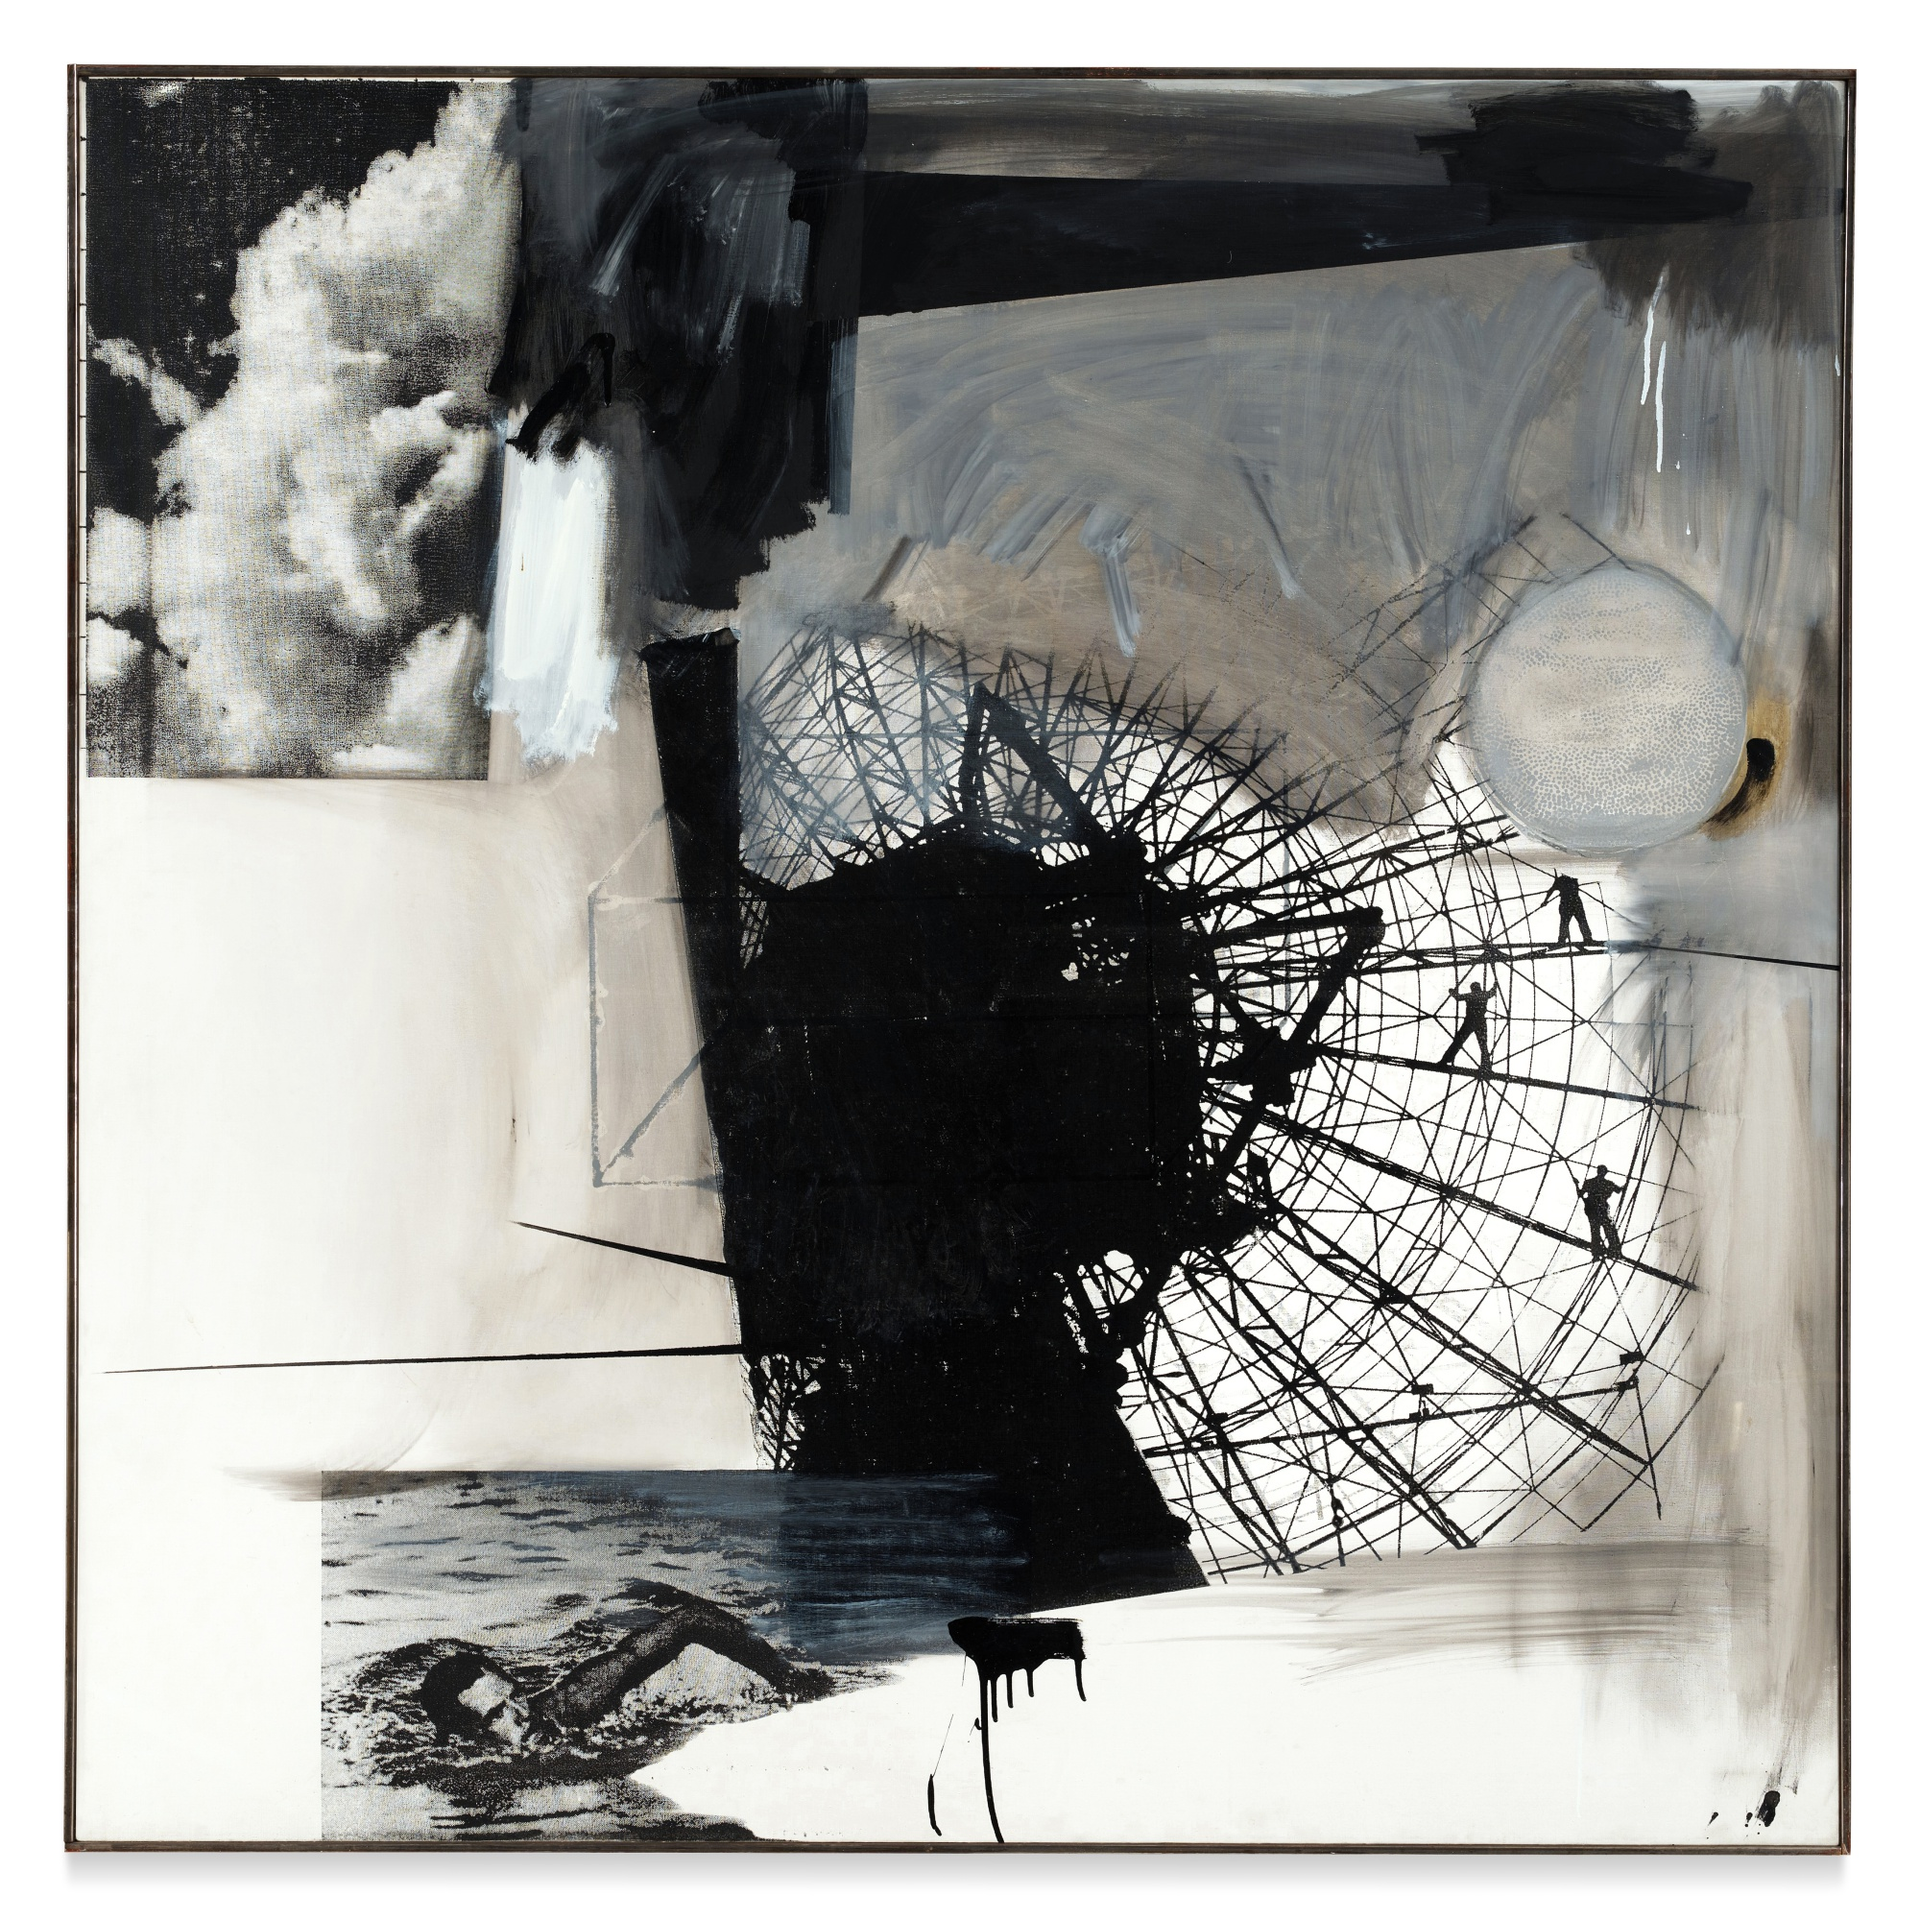 A variety of images are juxtaposed by Rauschenberg in this image, including clouds, the back view of a glass structure and a swimmer. The colour palete is monochrome.